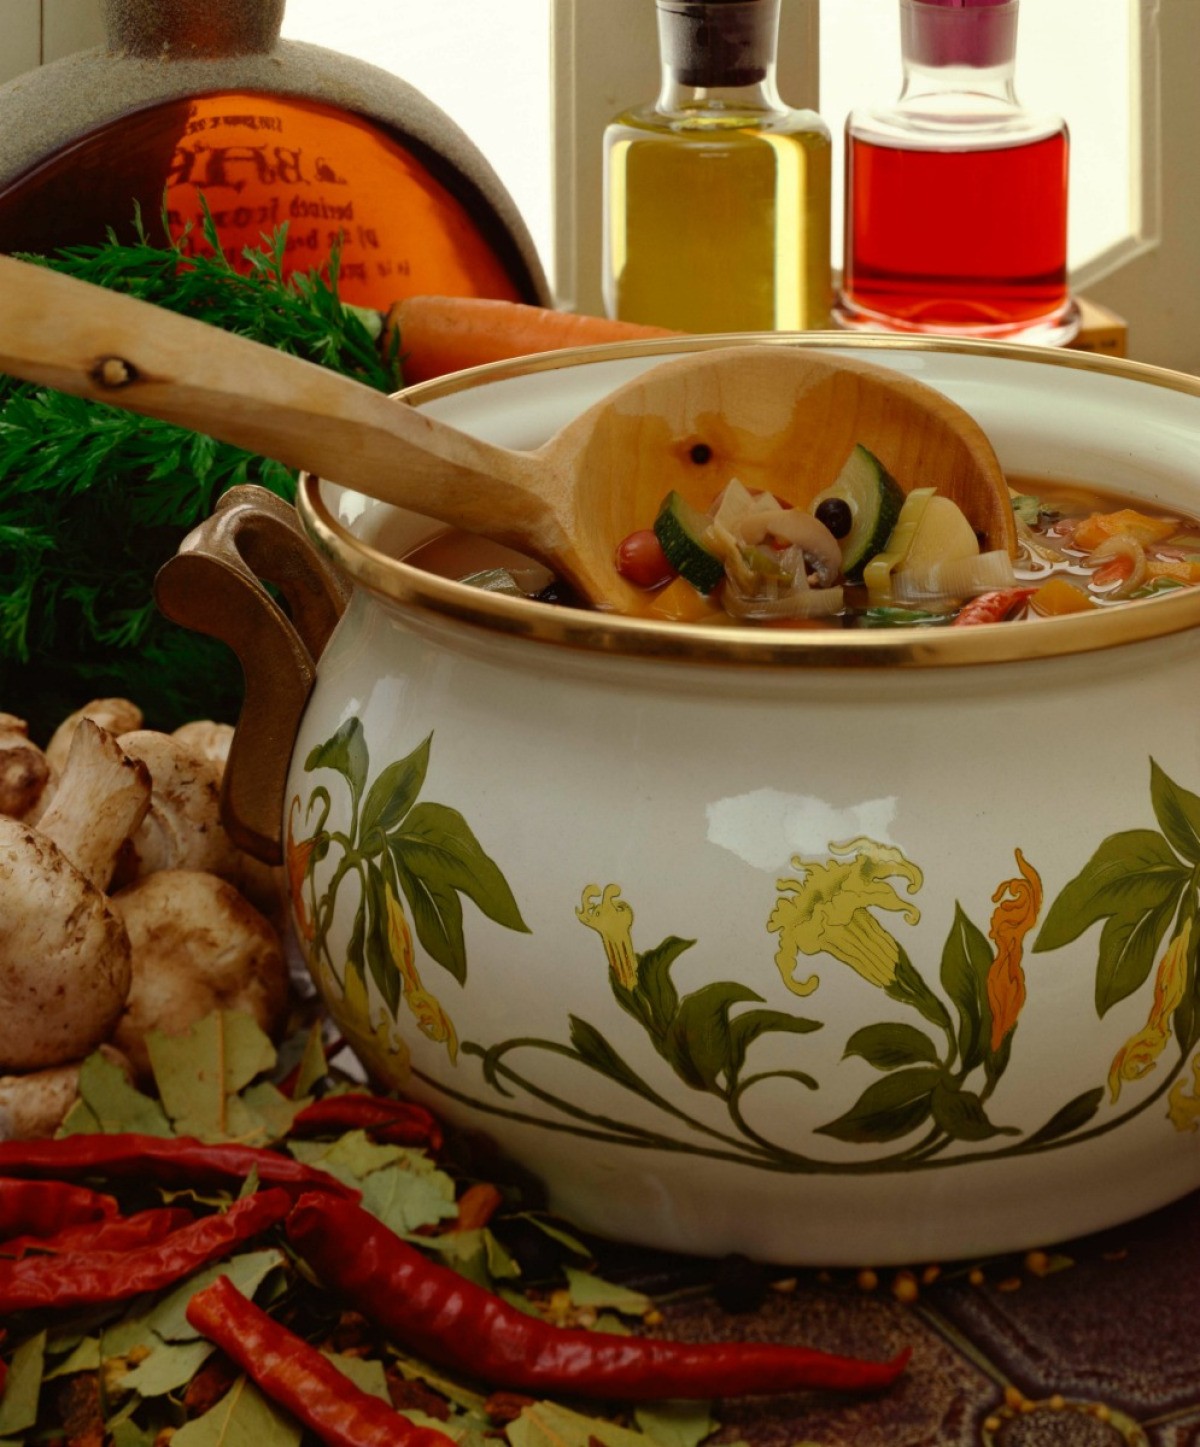 How Long Will Vegetable Soup Keep in the Refrigerator?